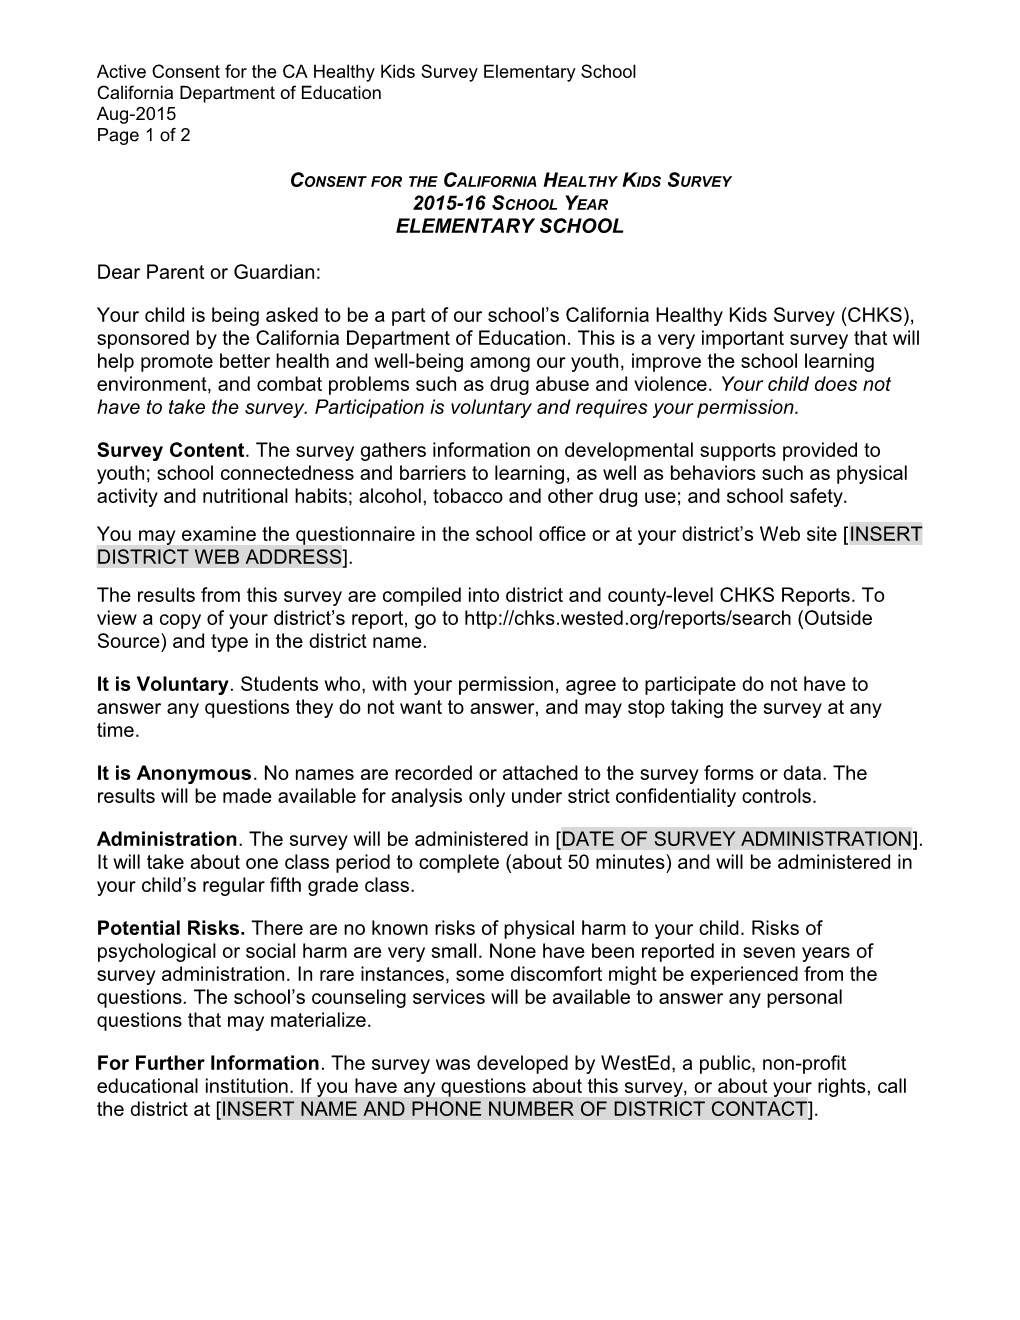 CHKS Active Consent Form Elementary - Research (CA Dept of Education)